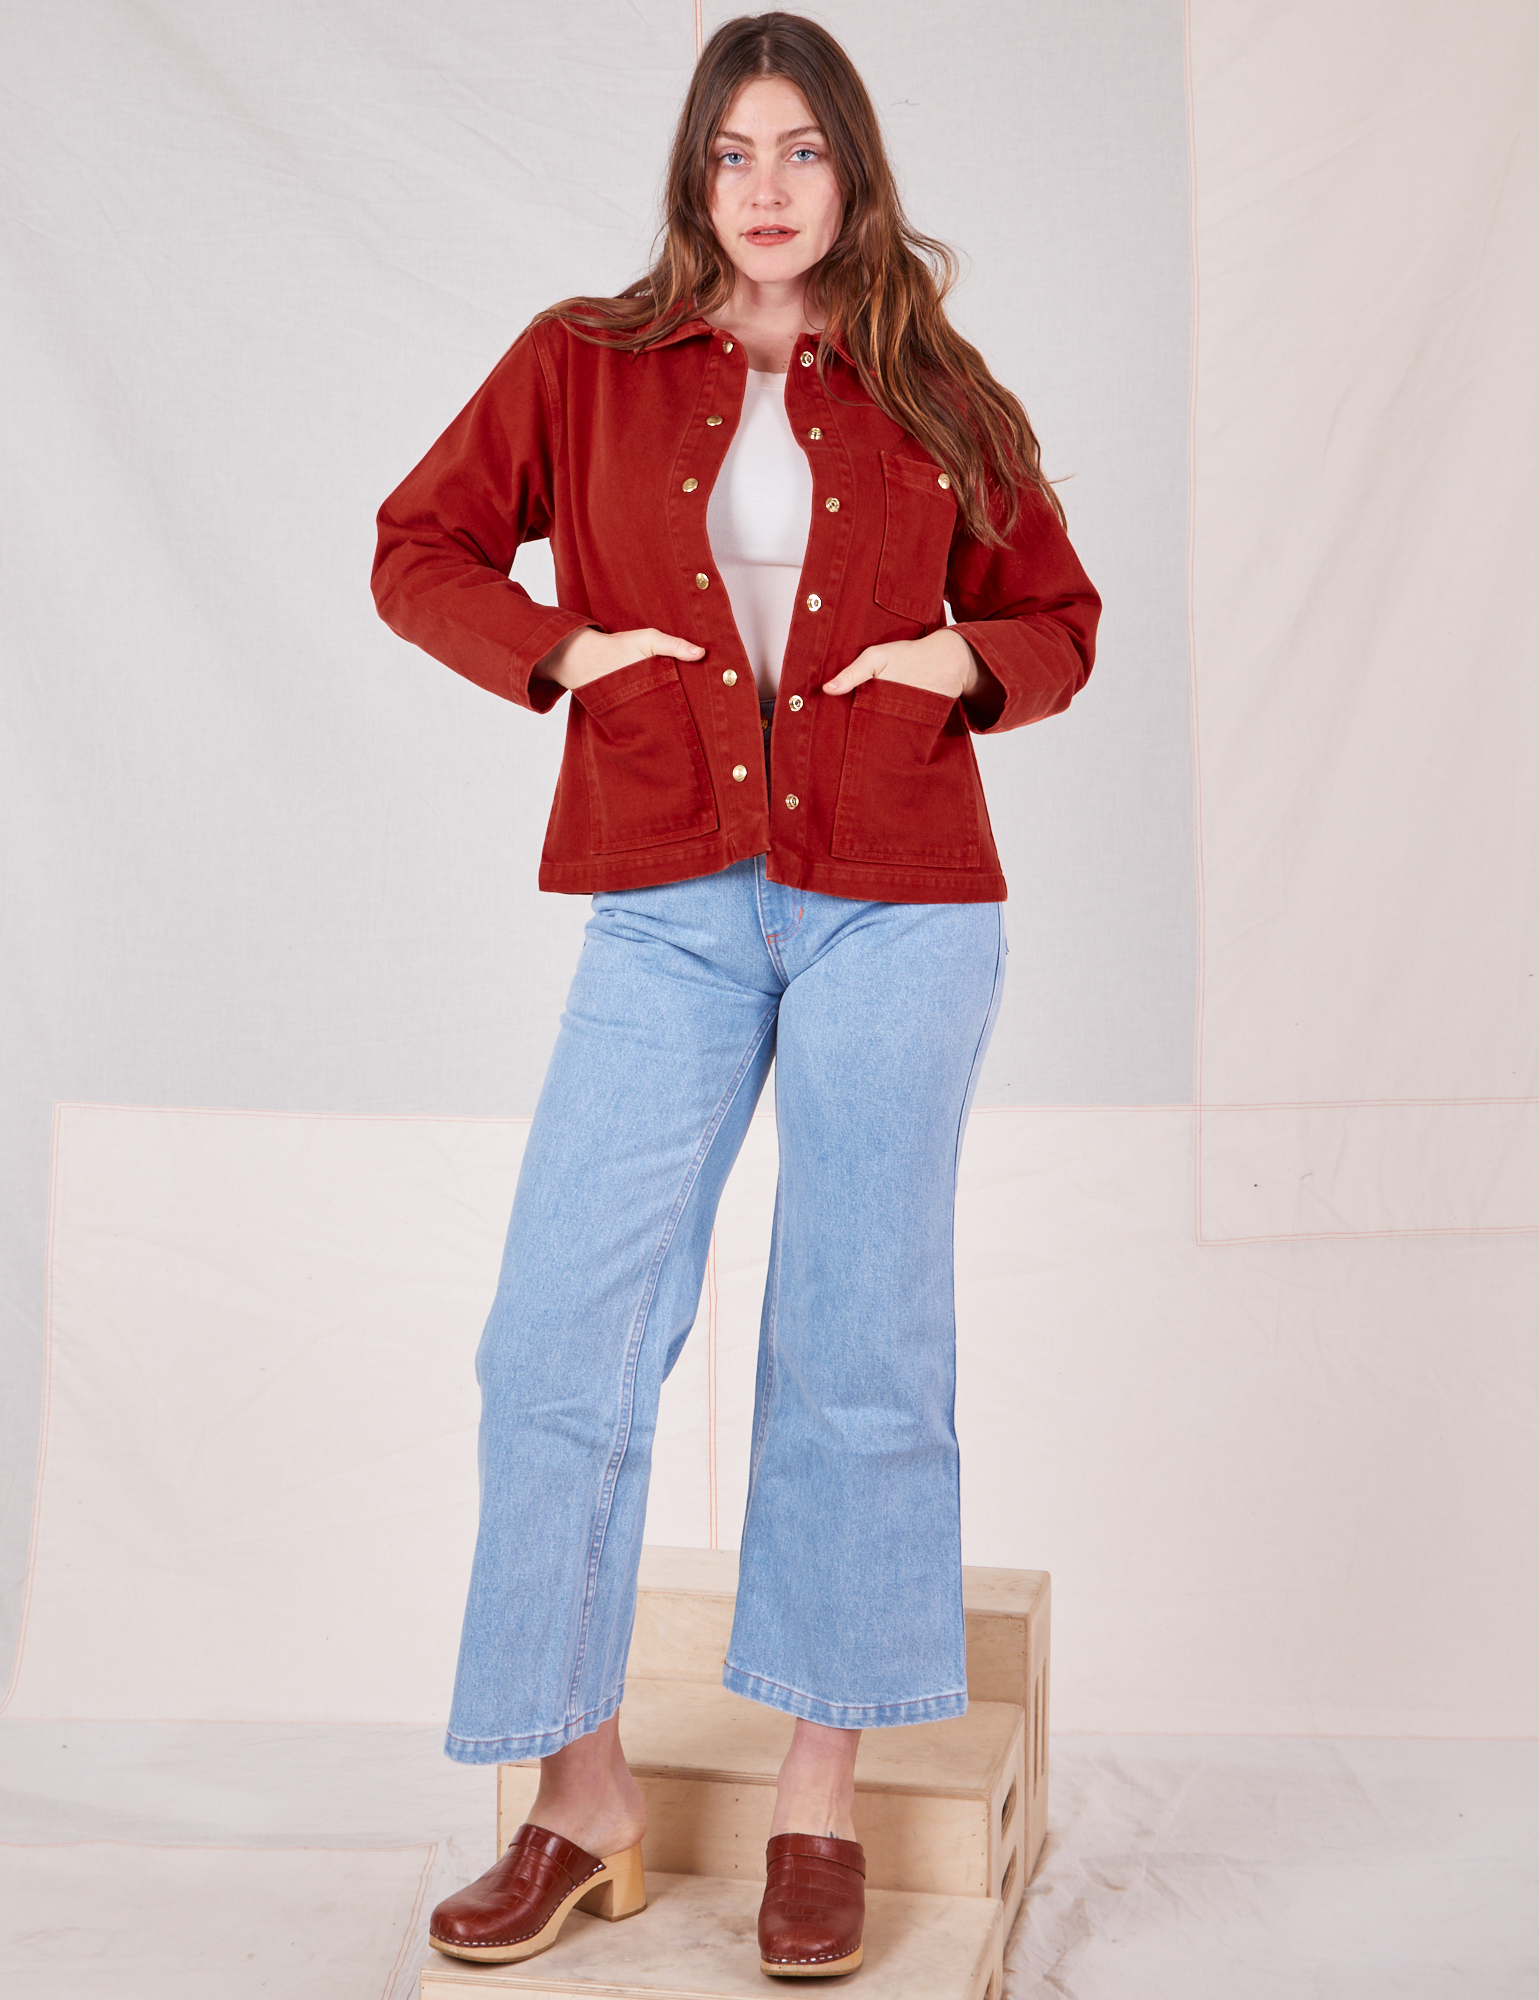 Allison is 5&#39;10&quot; and wearing XS Denim Work Jacket in Paprika paired with light wash Sailor Jeans